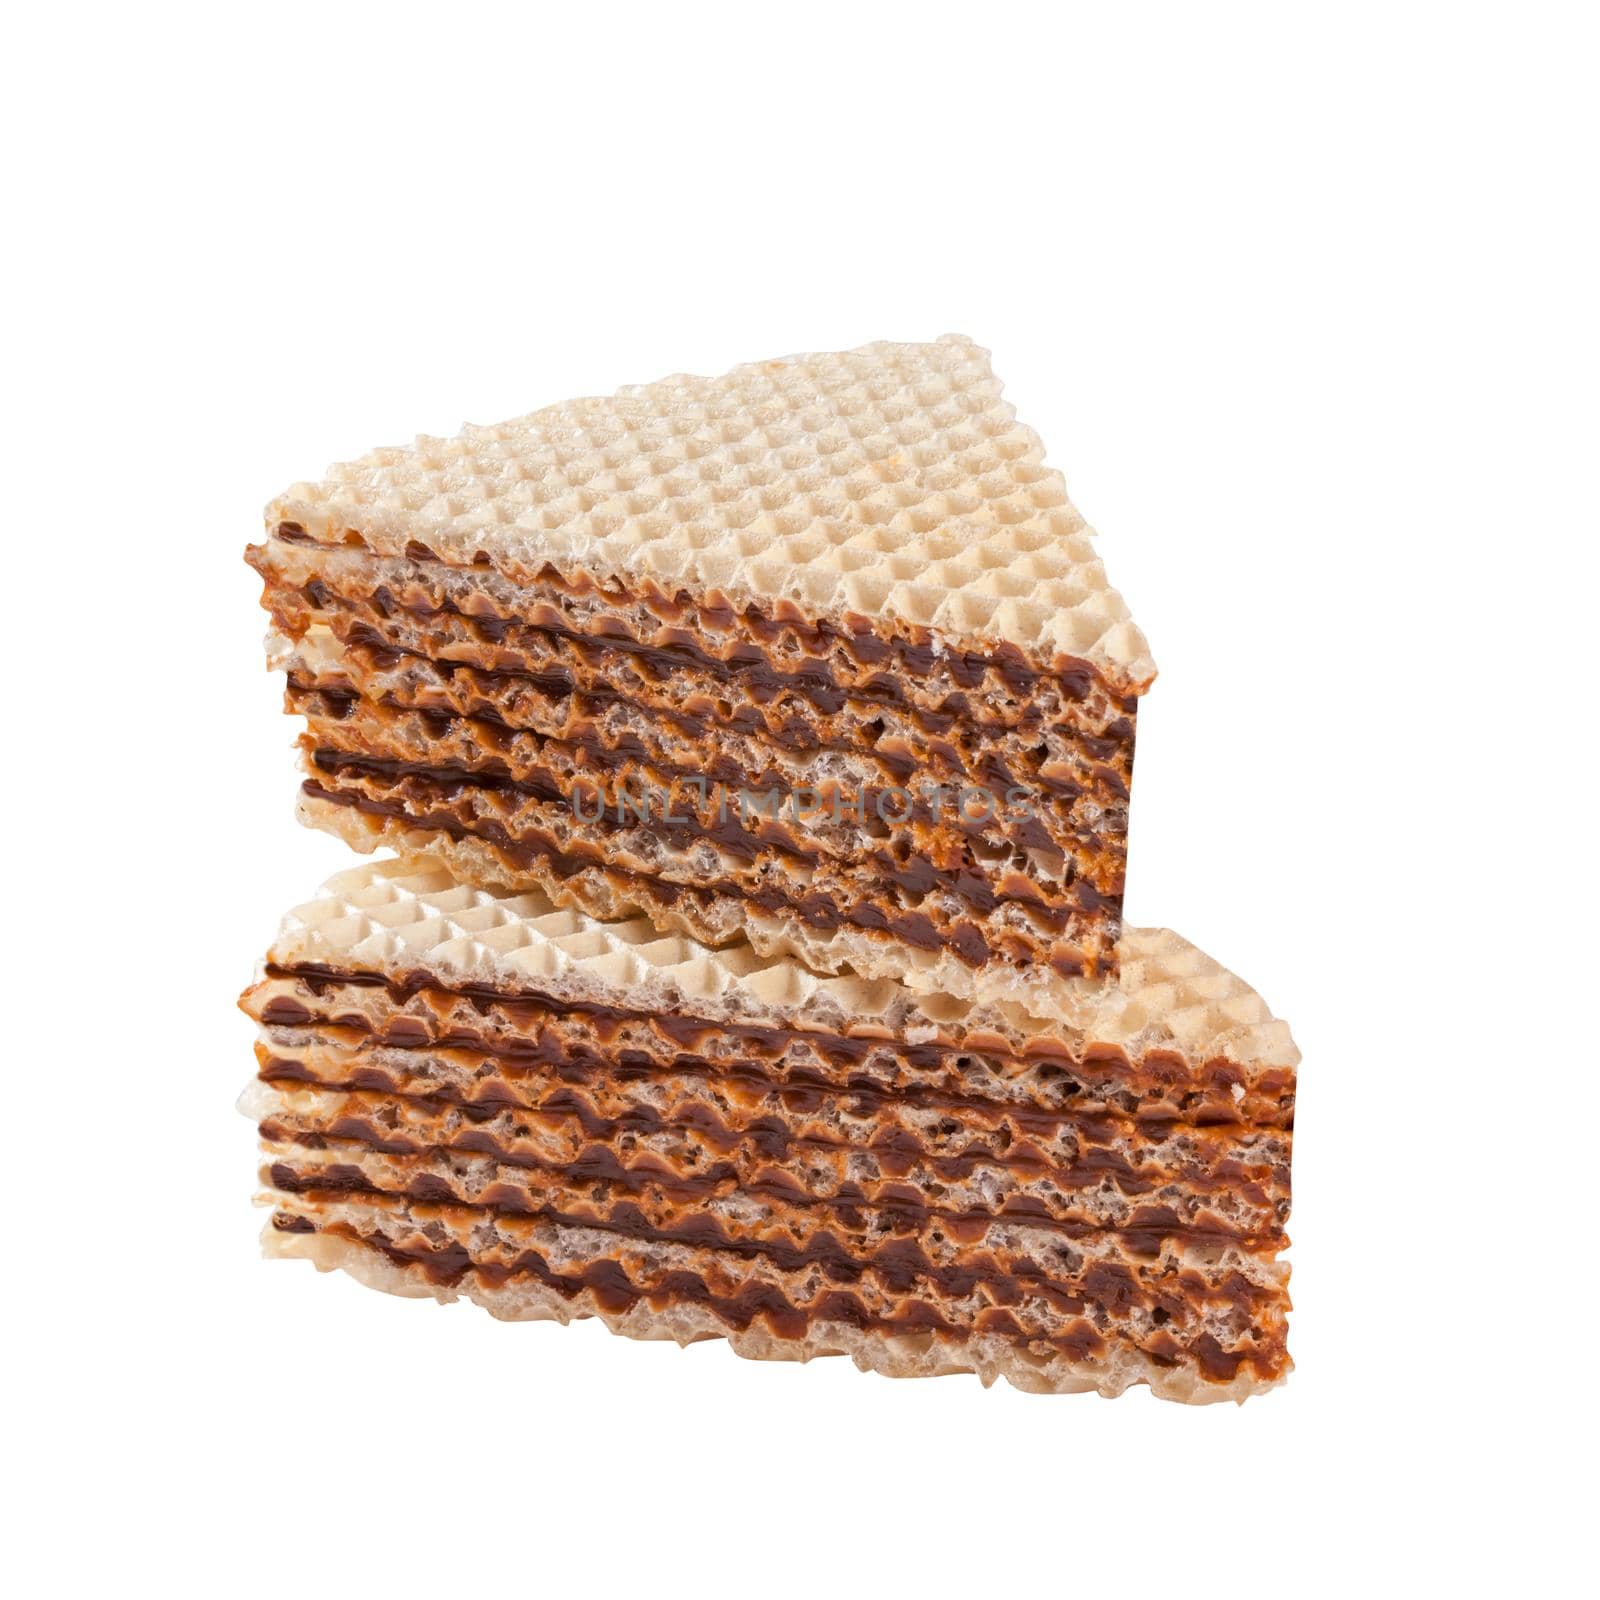 Slices of delicious no-bake waffle cake filled with caramelized milk dulce de leche isolated on white background